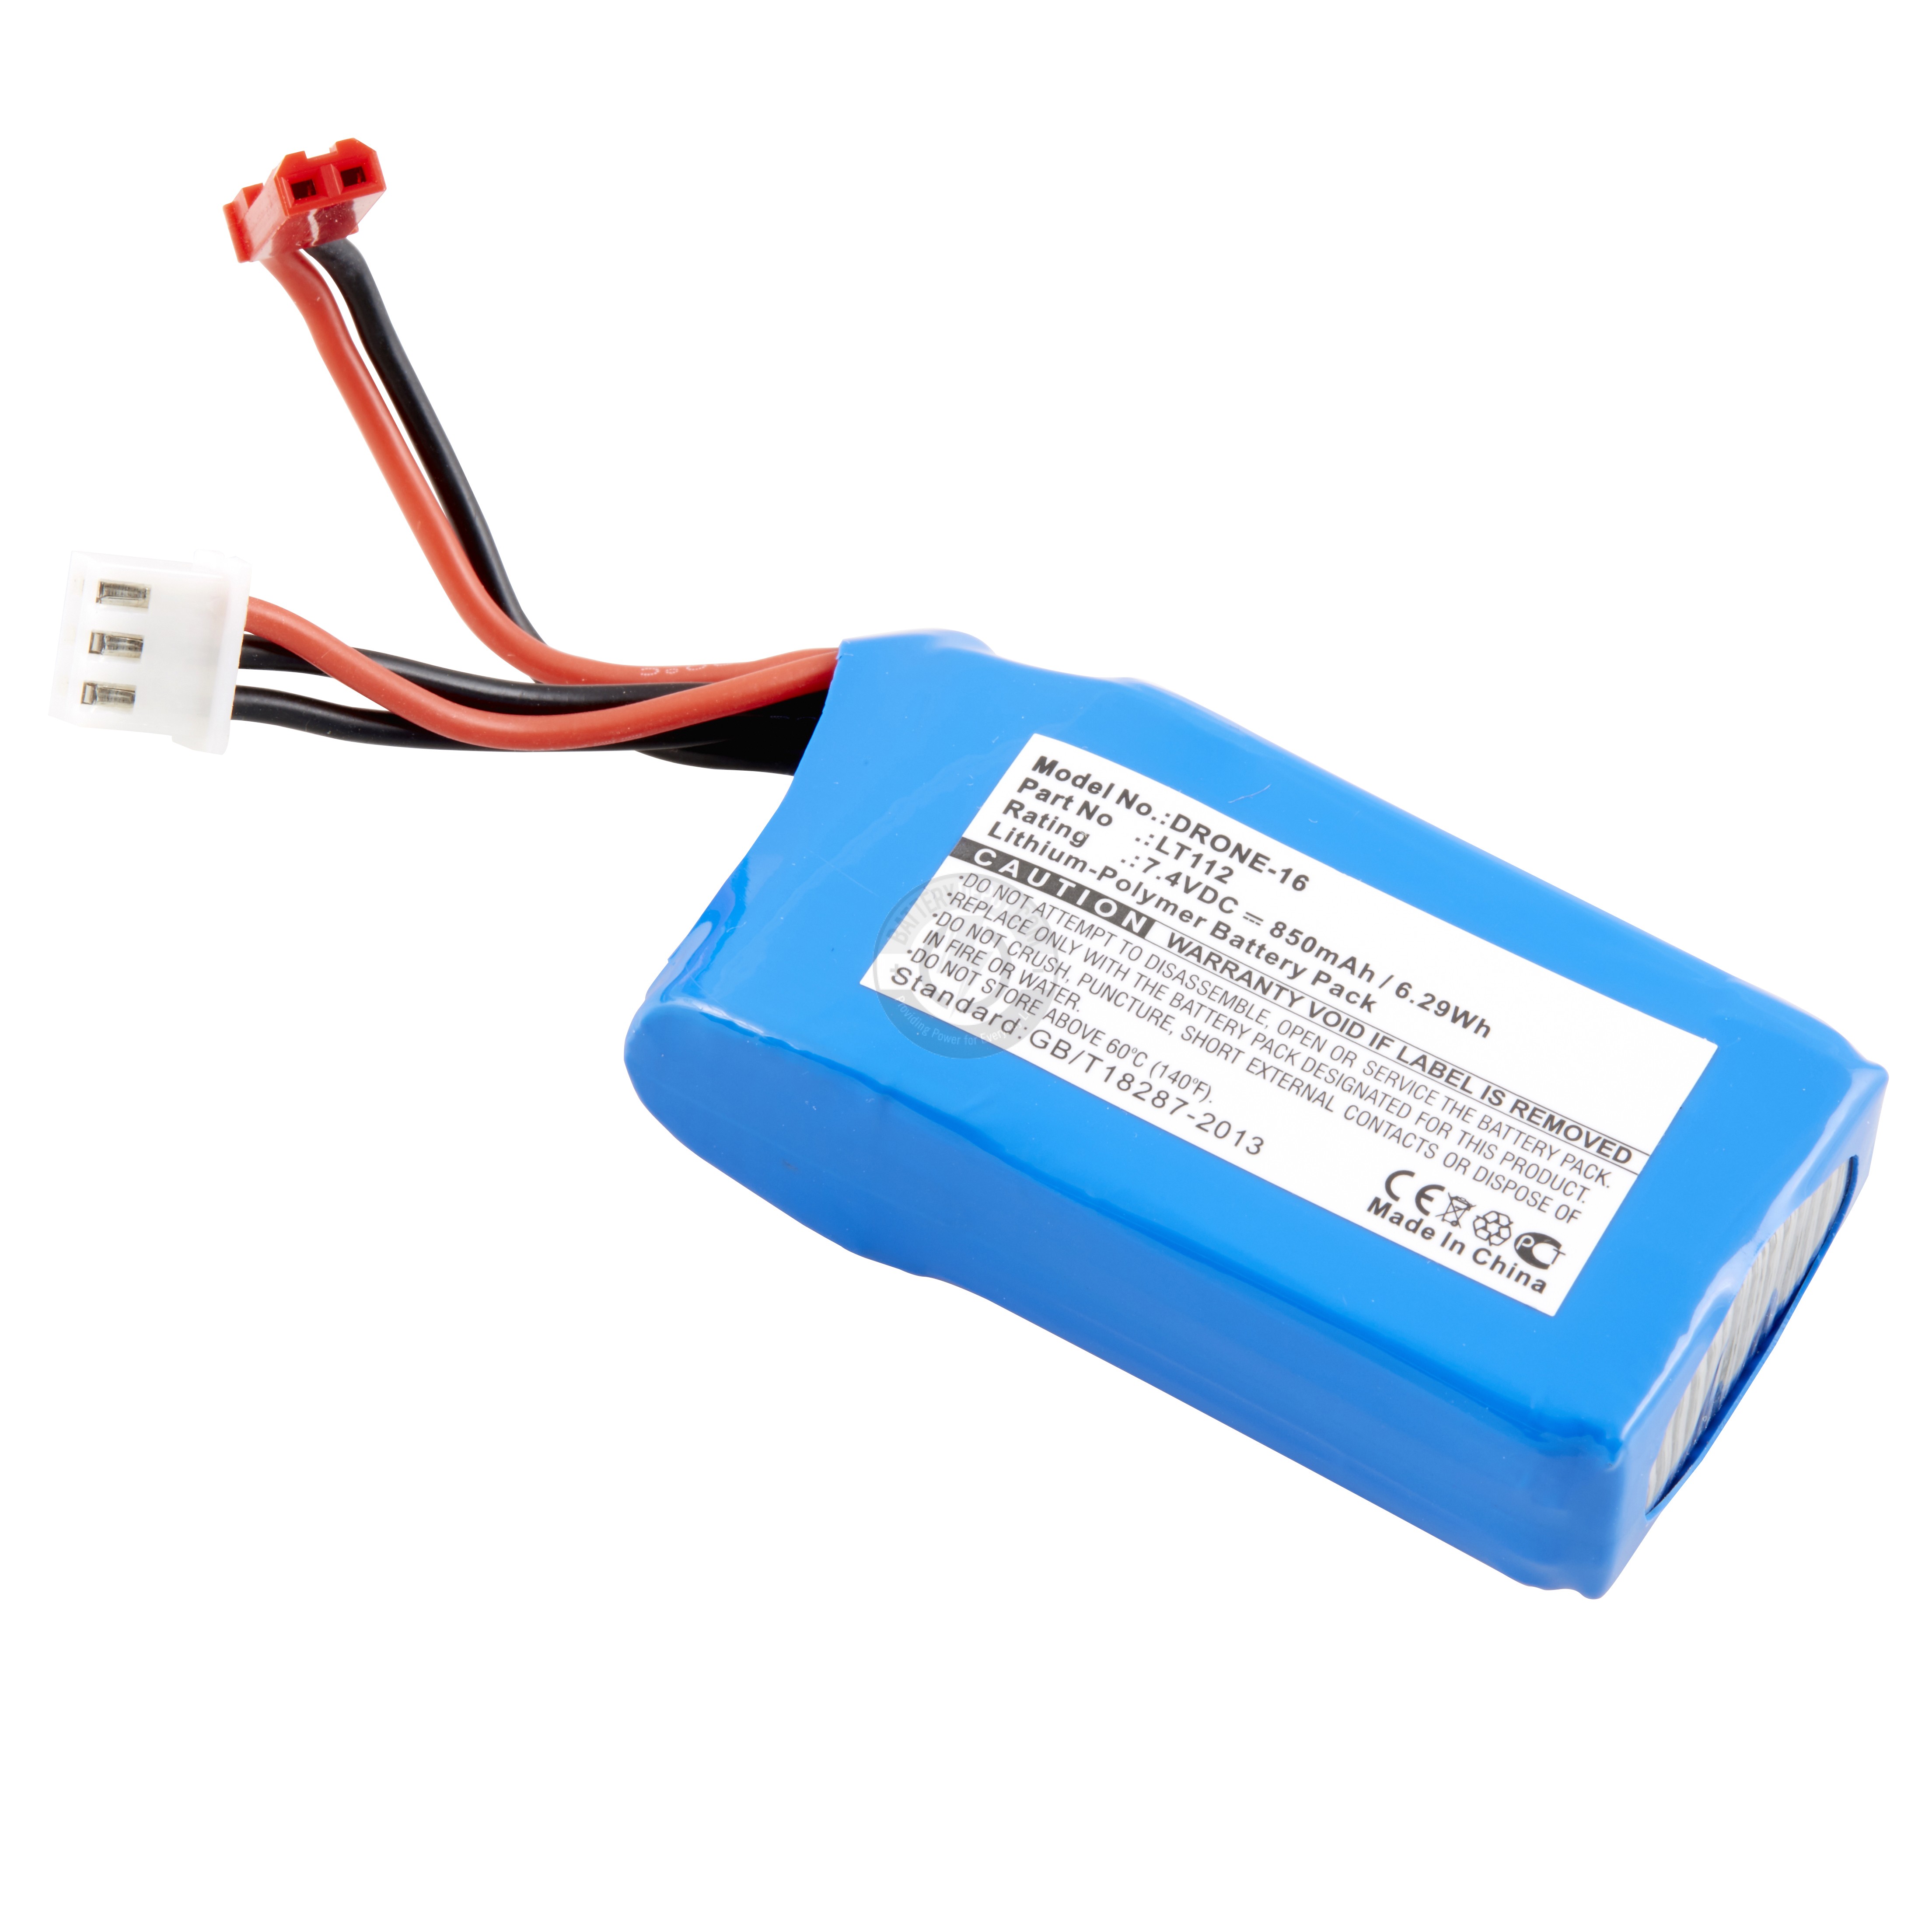 Replacement battery for UDI drones